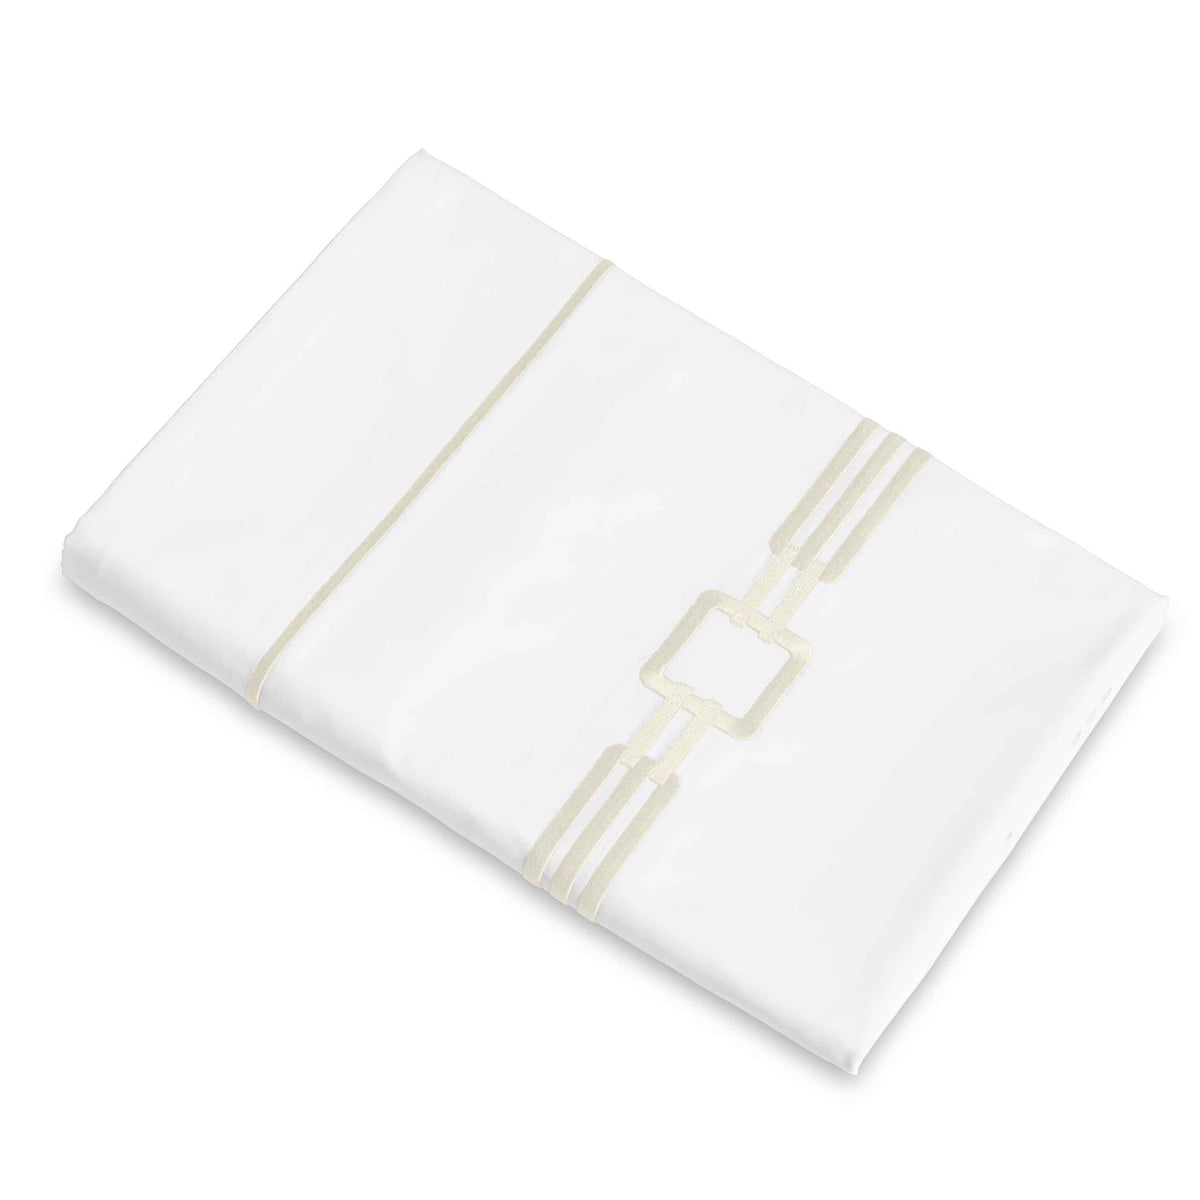 Clear Image of Signoria Retrò Flat Sheet in White/Ivory Color